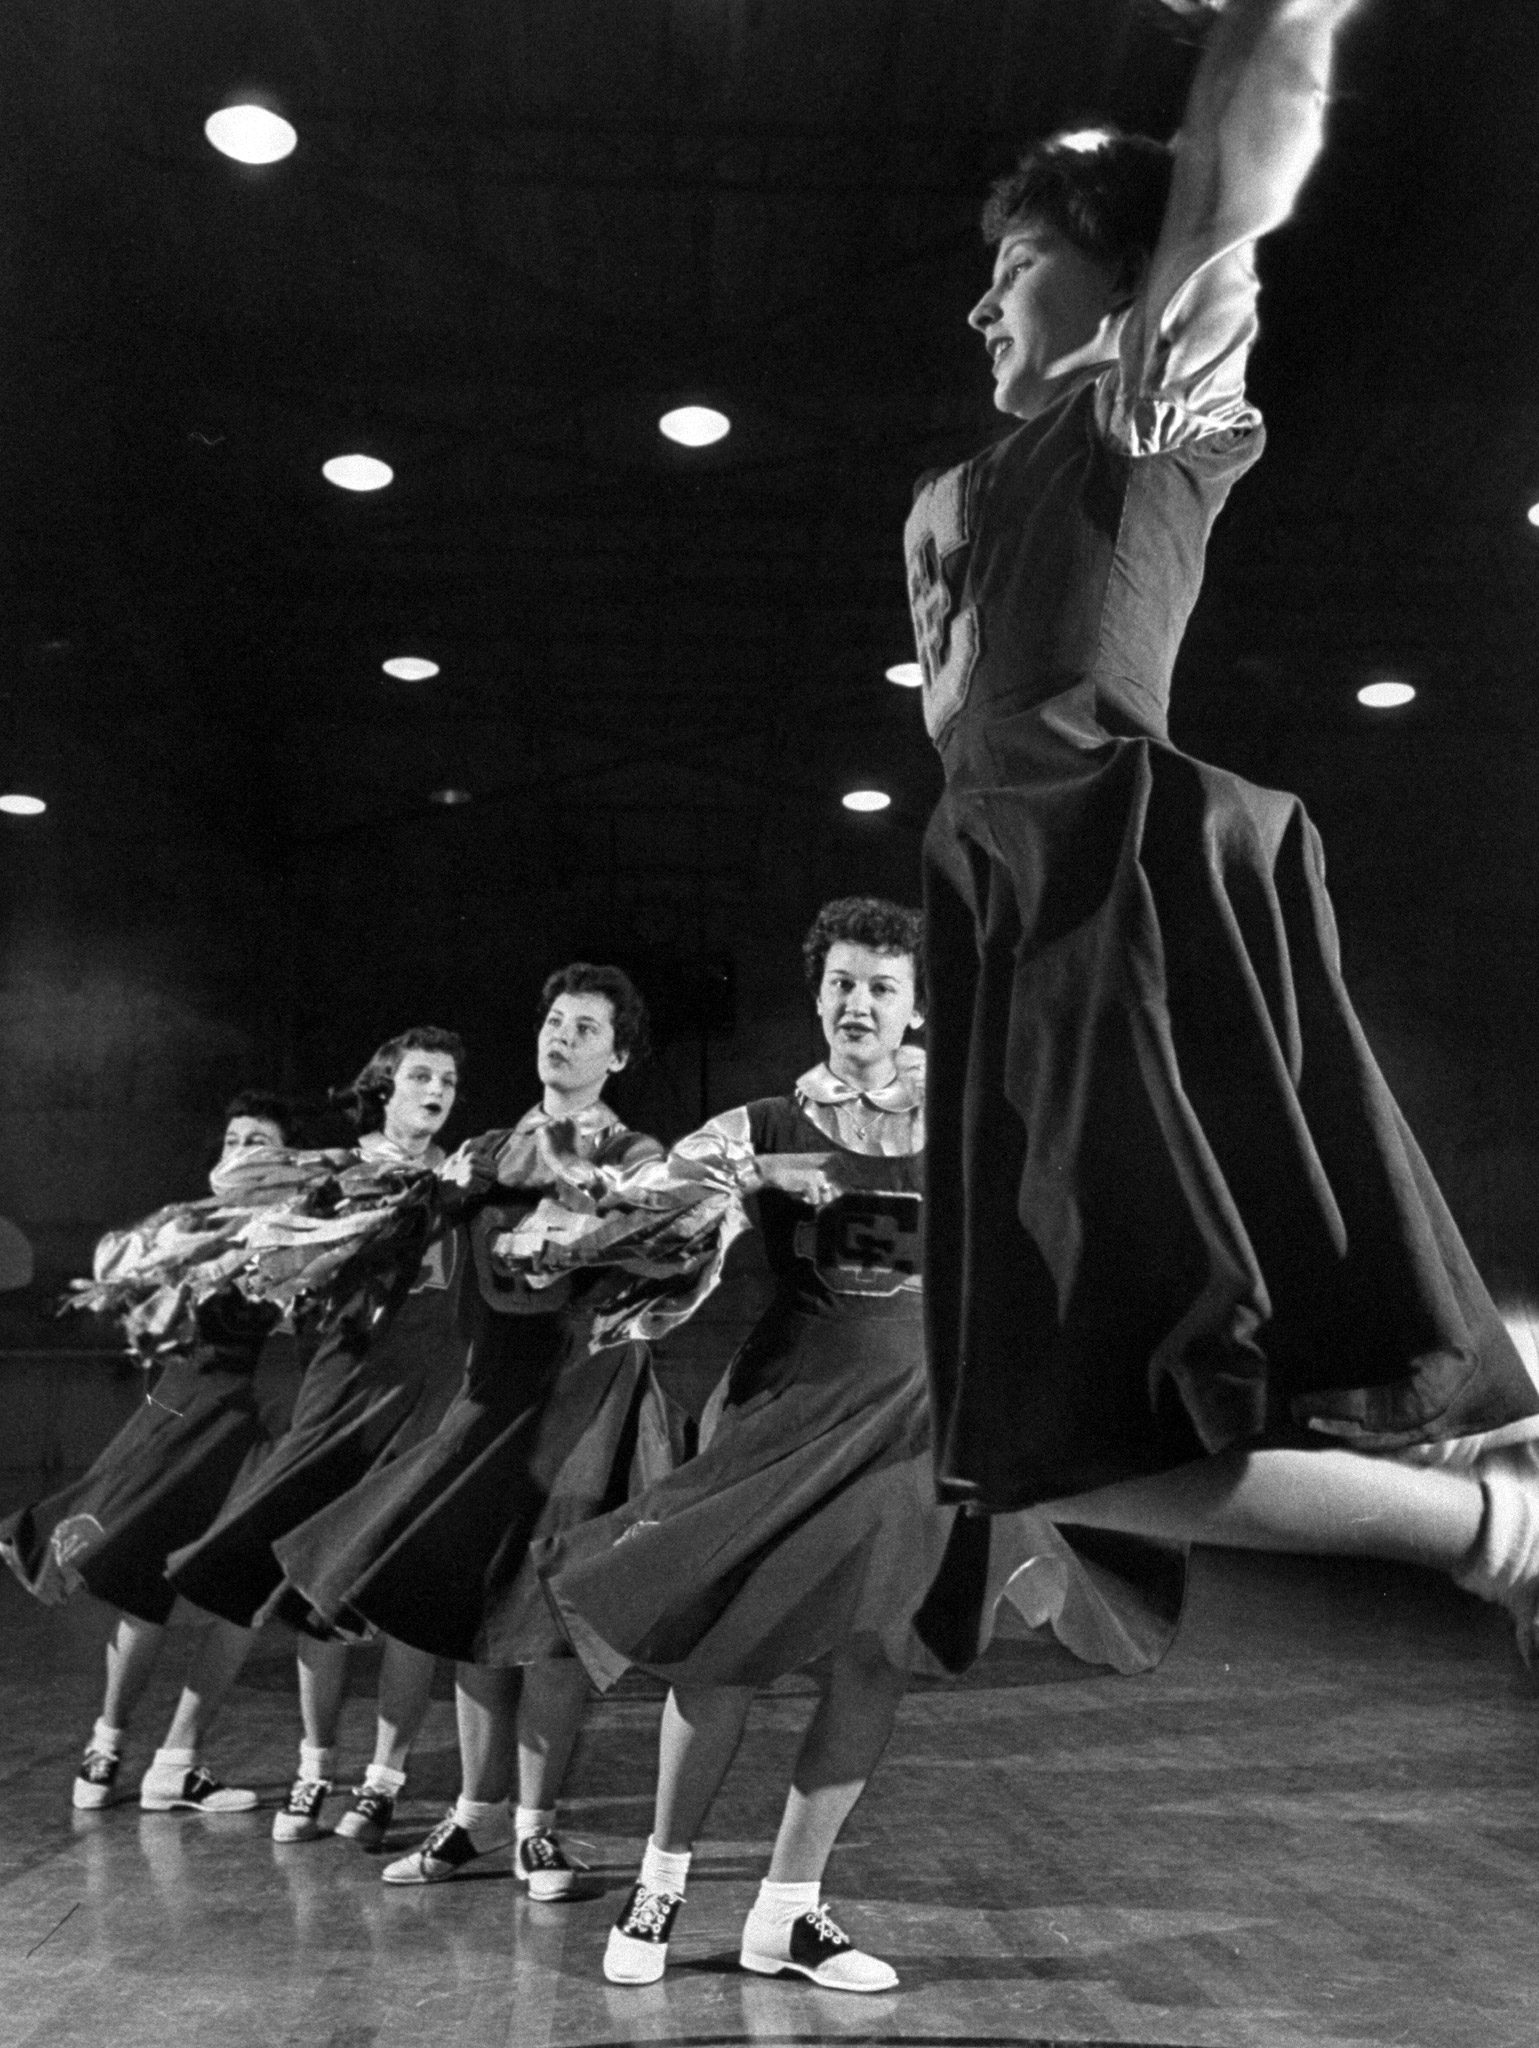 The girls of Central Catholic High School performing their cheerleading act in the gym, 1953.